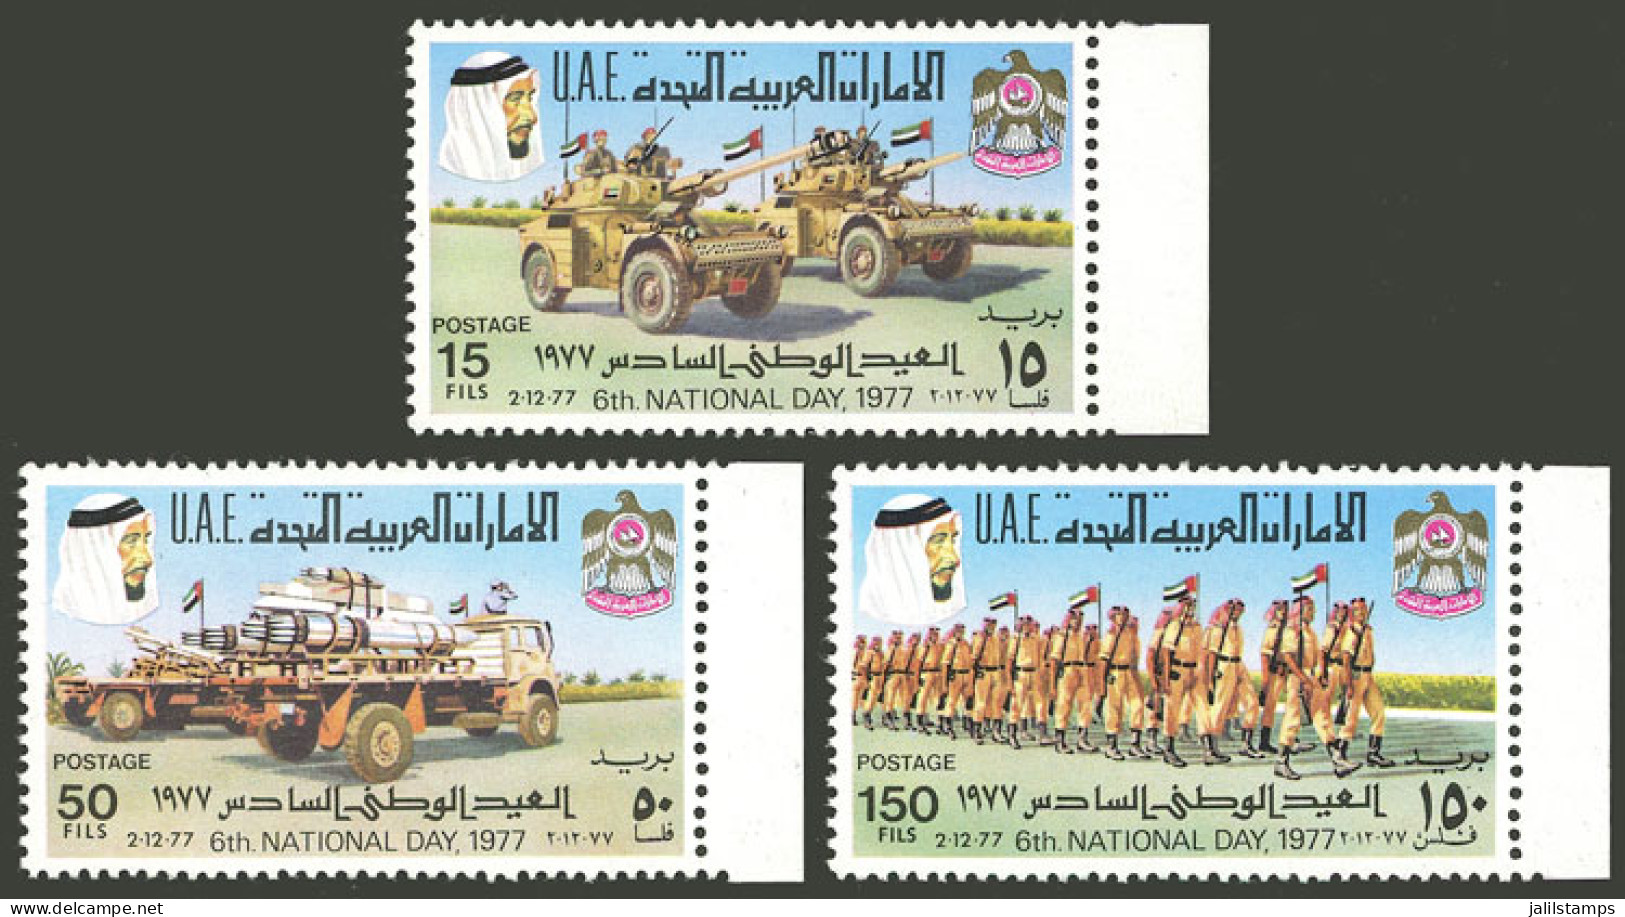 UNITED ARAB EMIRATES: 1977 National Day (soldiers And War Vehicules), Complete Set Of 3 Values Prepared But Unissued, MN - Emirats Arabes Unis (Général)